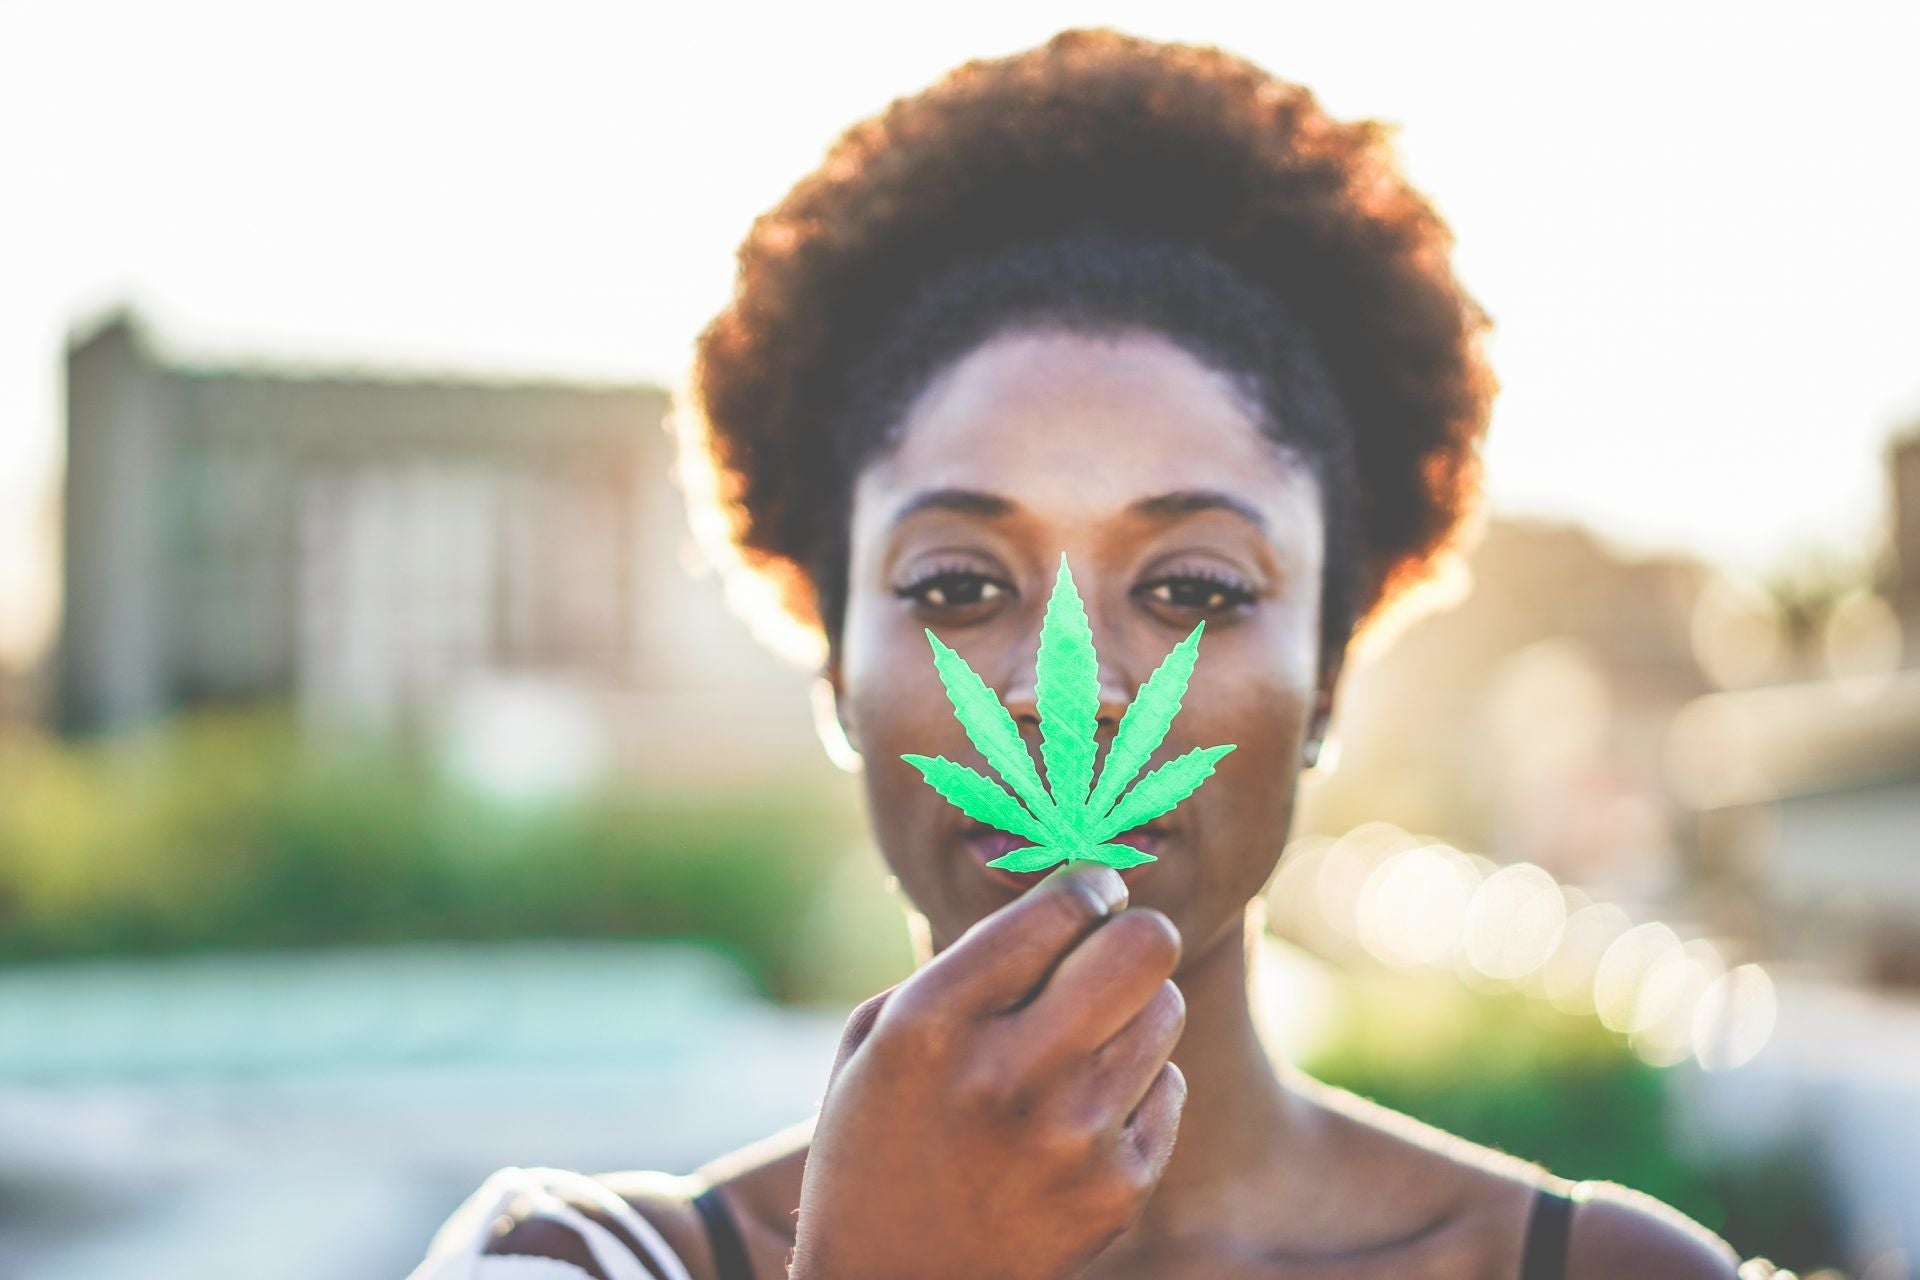 10 Women Who’ve Transformed the Cannabis Industry